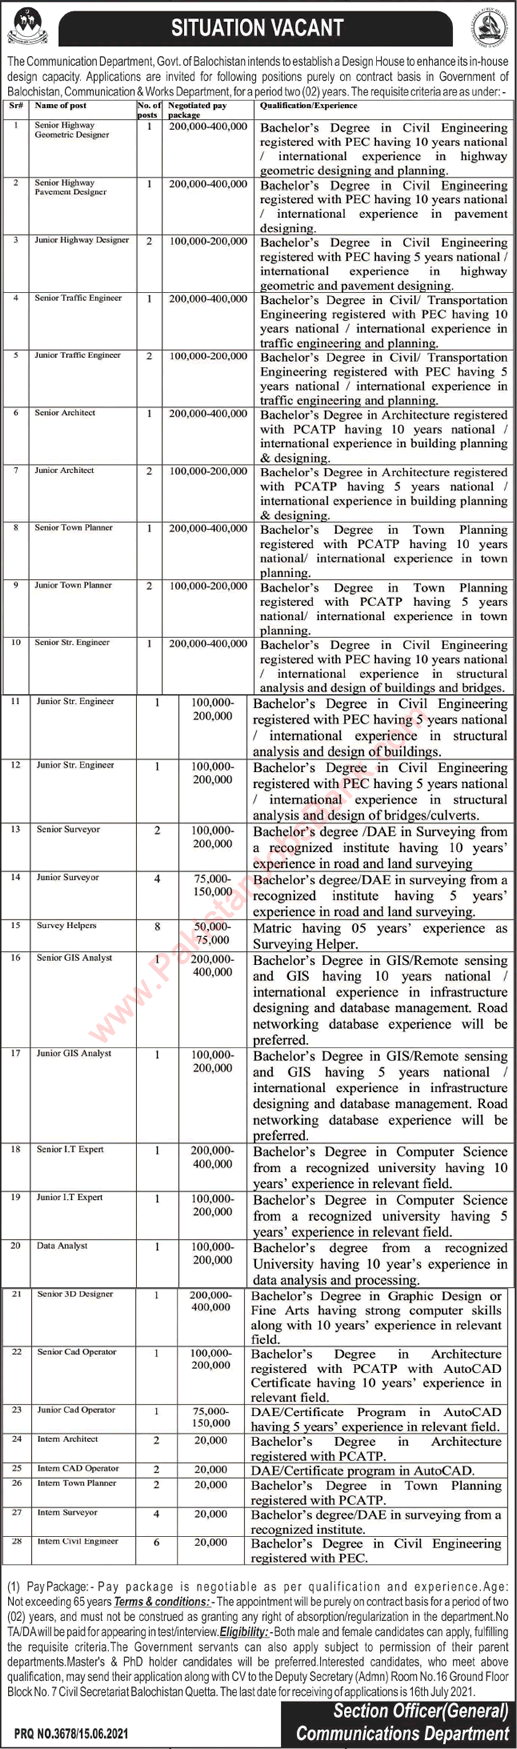 Communication and Works Department Balochistan Jobs 2021 June Civil Engineers, Surveyors & Others Latest